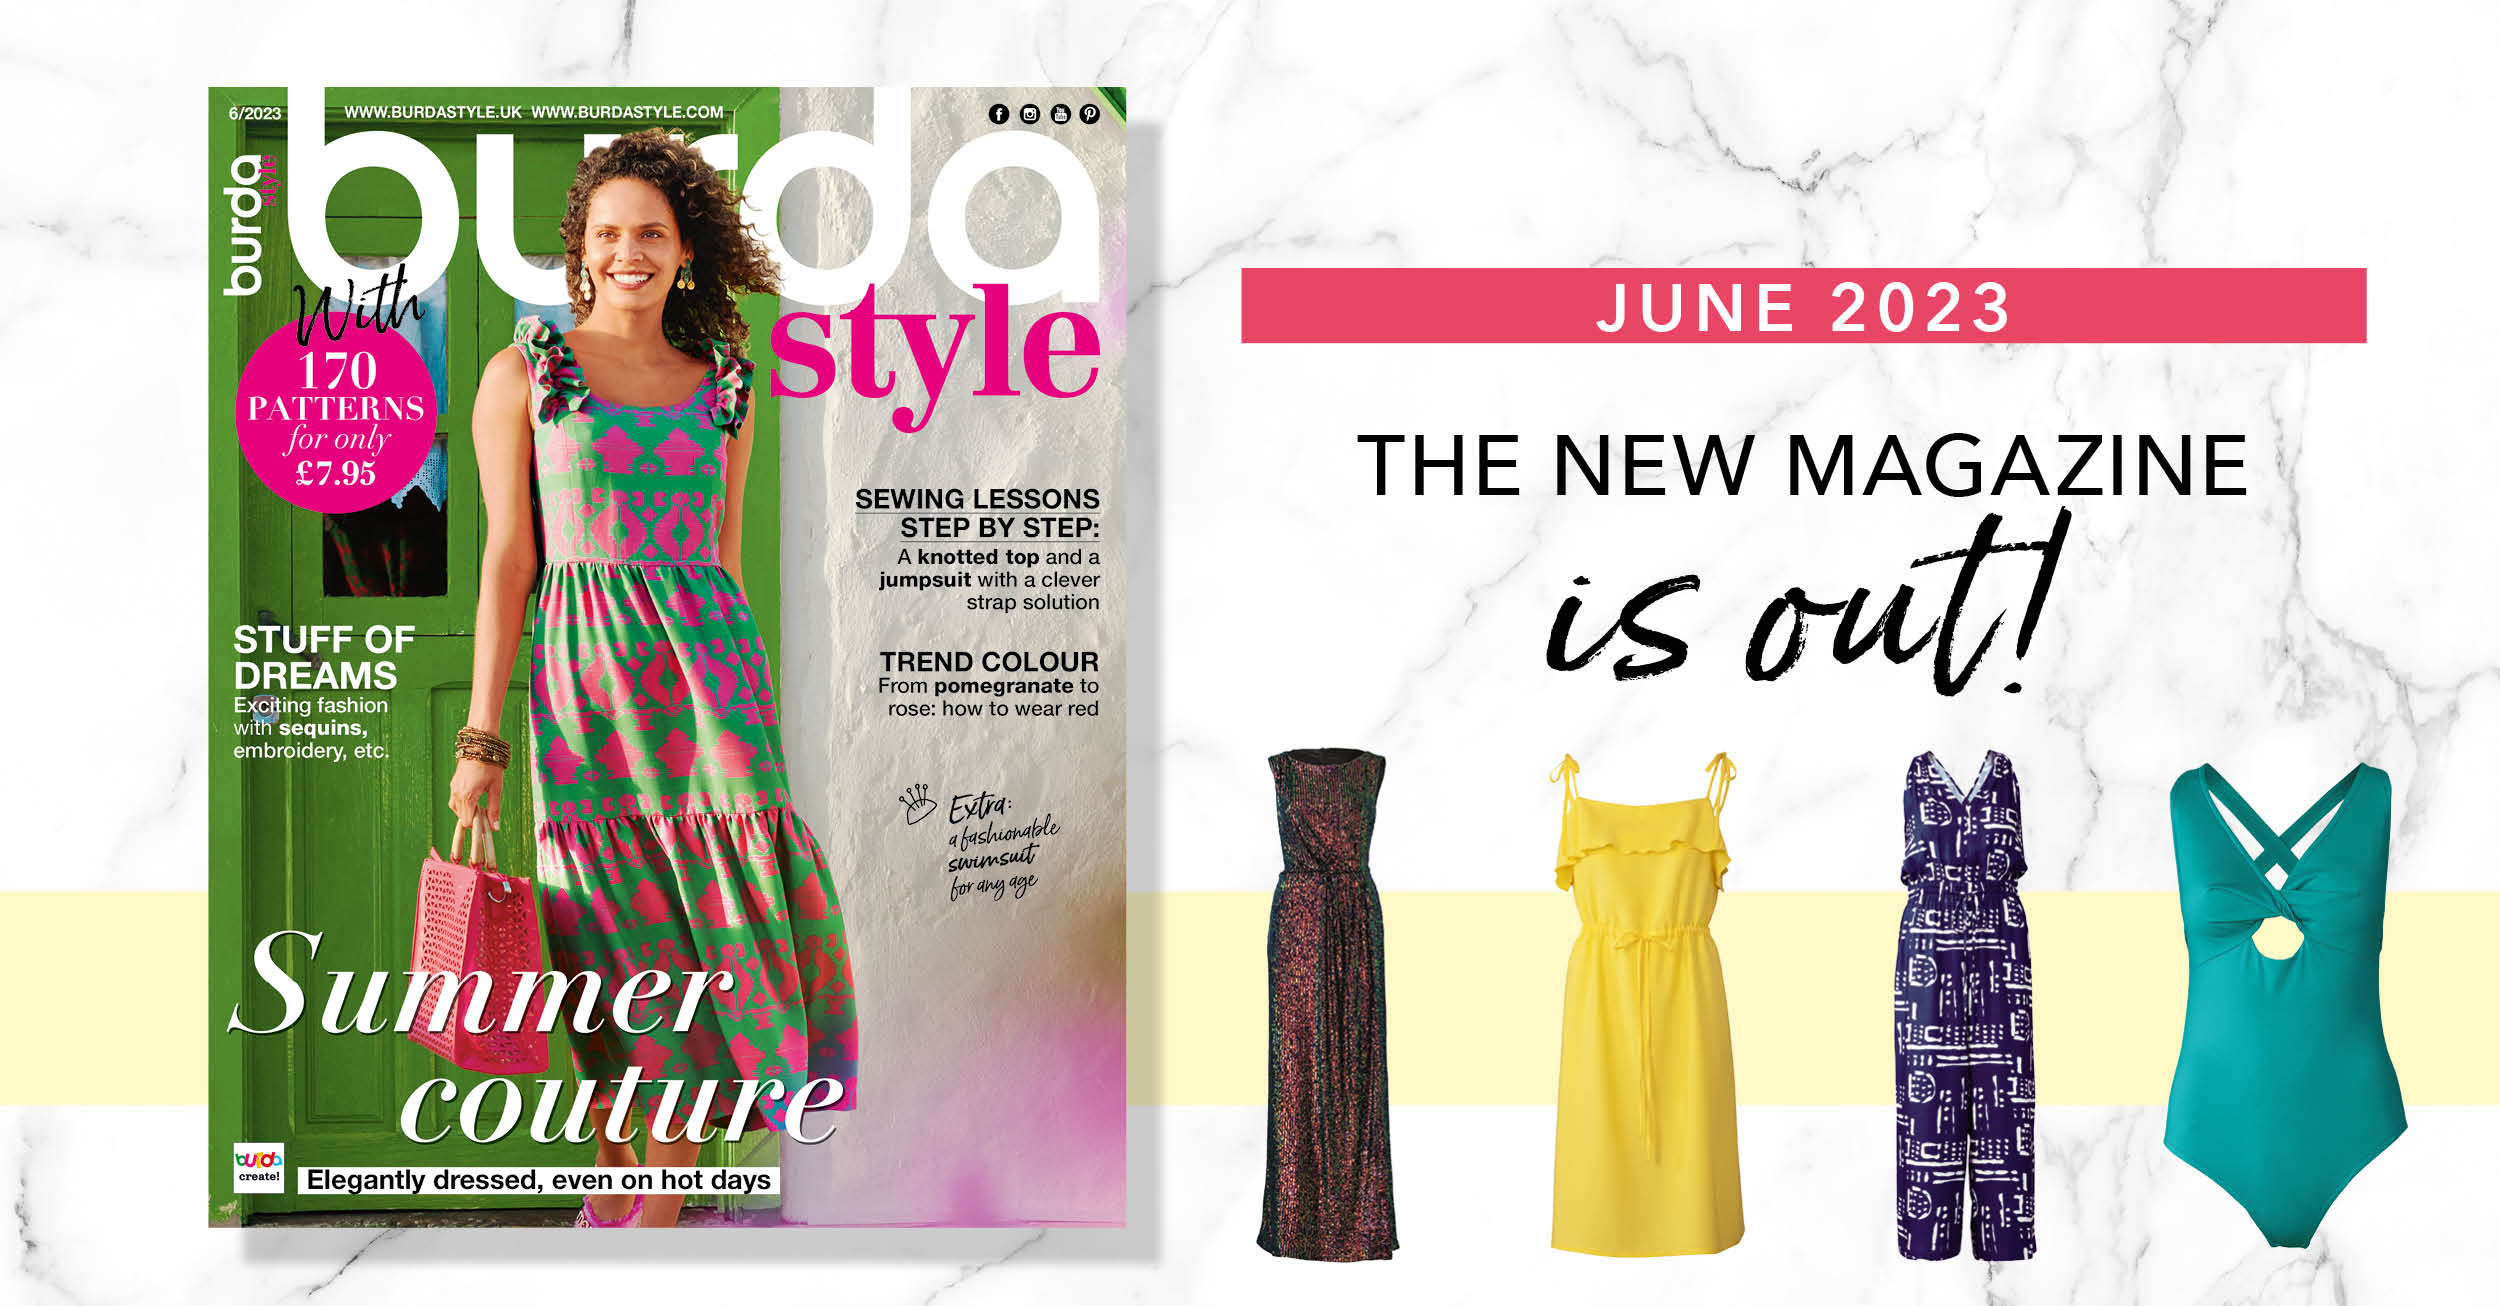 June 2023: The New Issue of Burda Style!